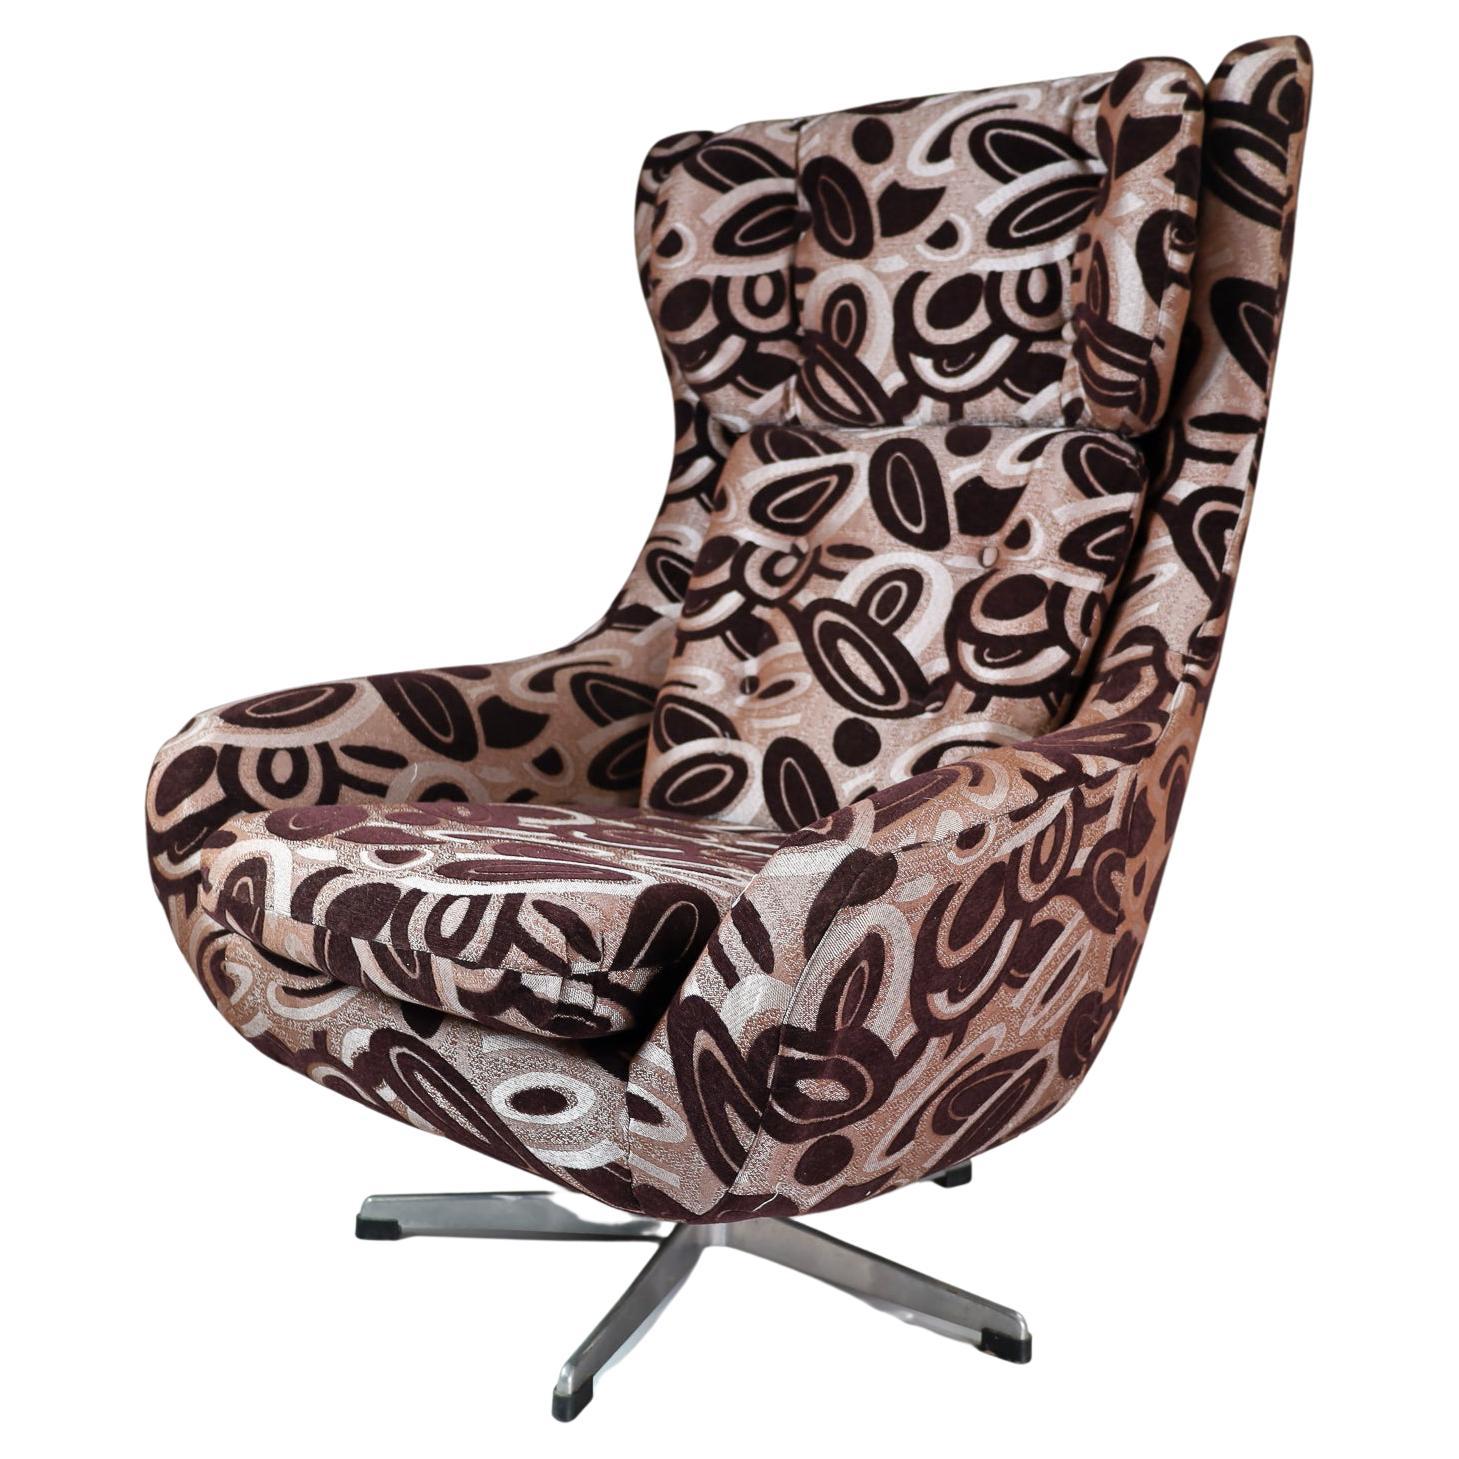 Swivel Wing Chair in New Reupholstered Fabric, Czech Republic, 1970s